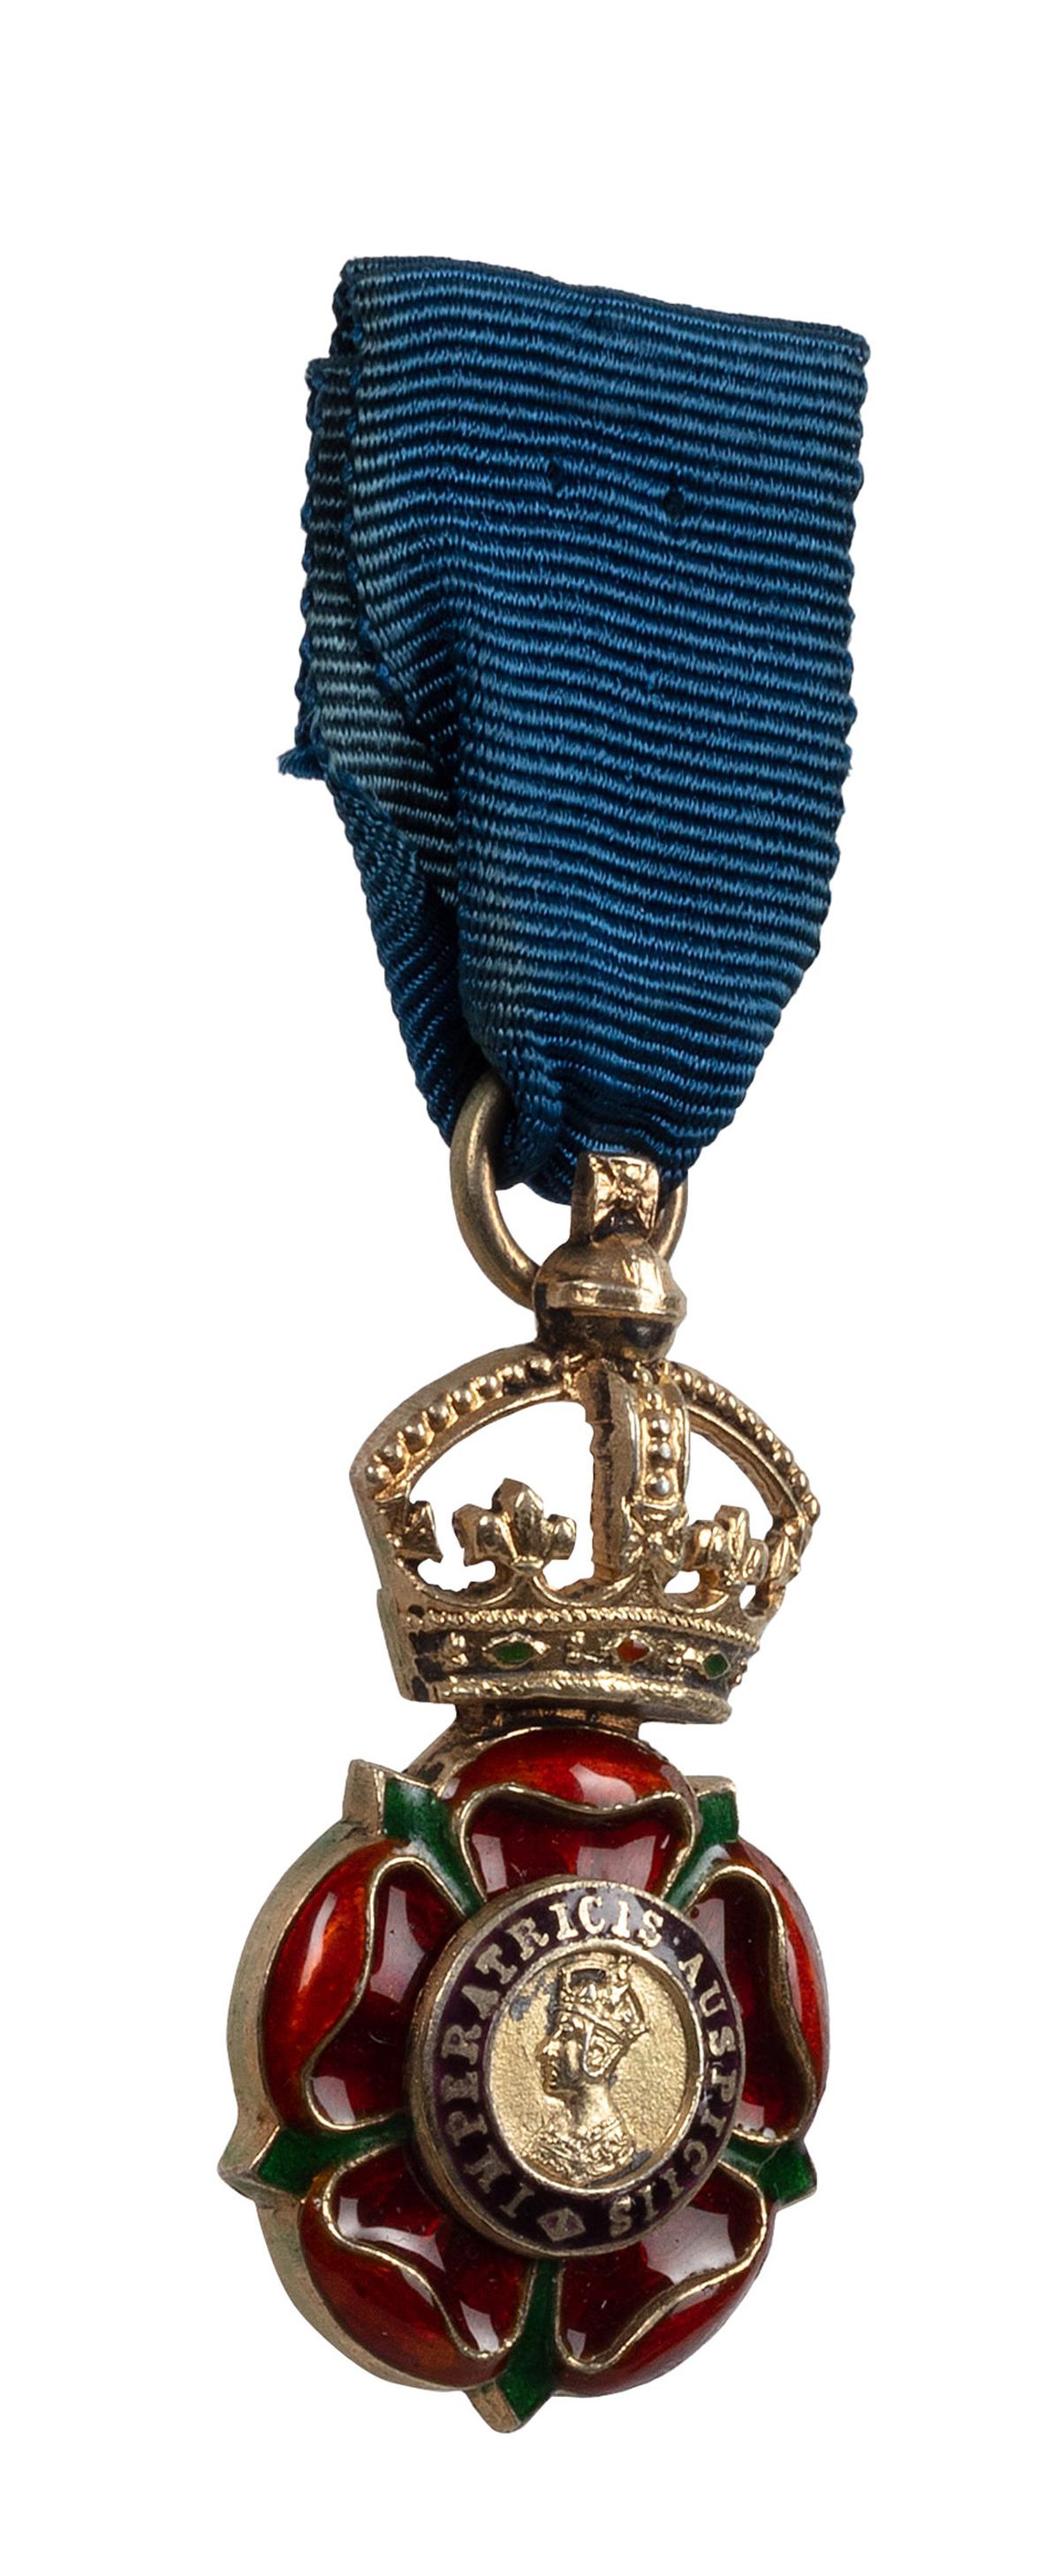 Companion of the Most Eminent Order of the Indian Empire